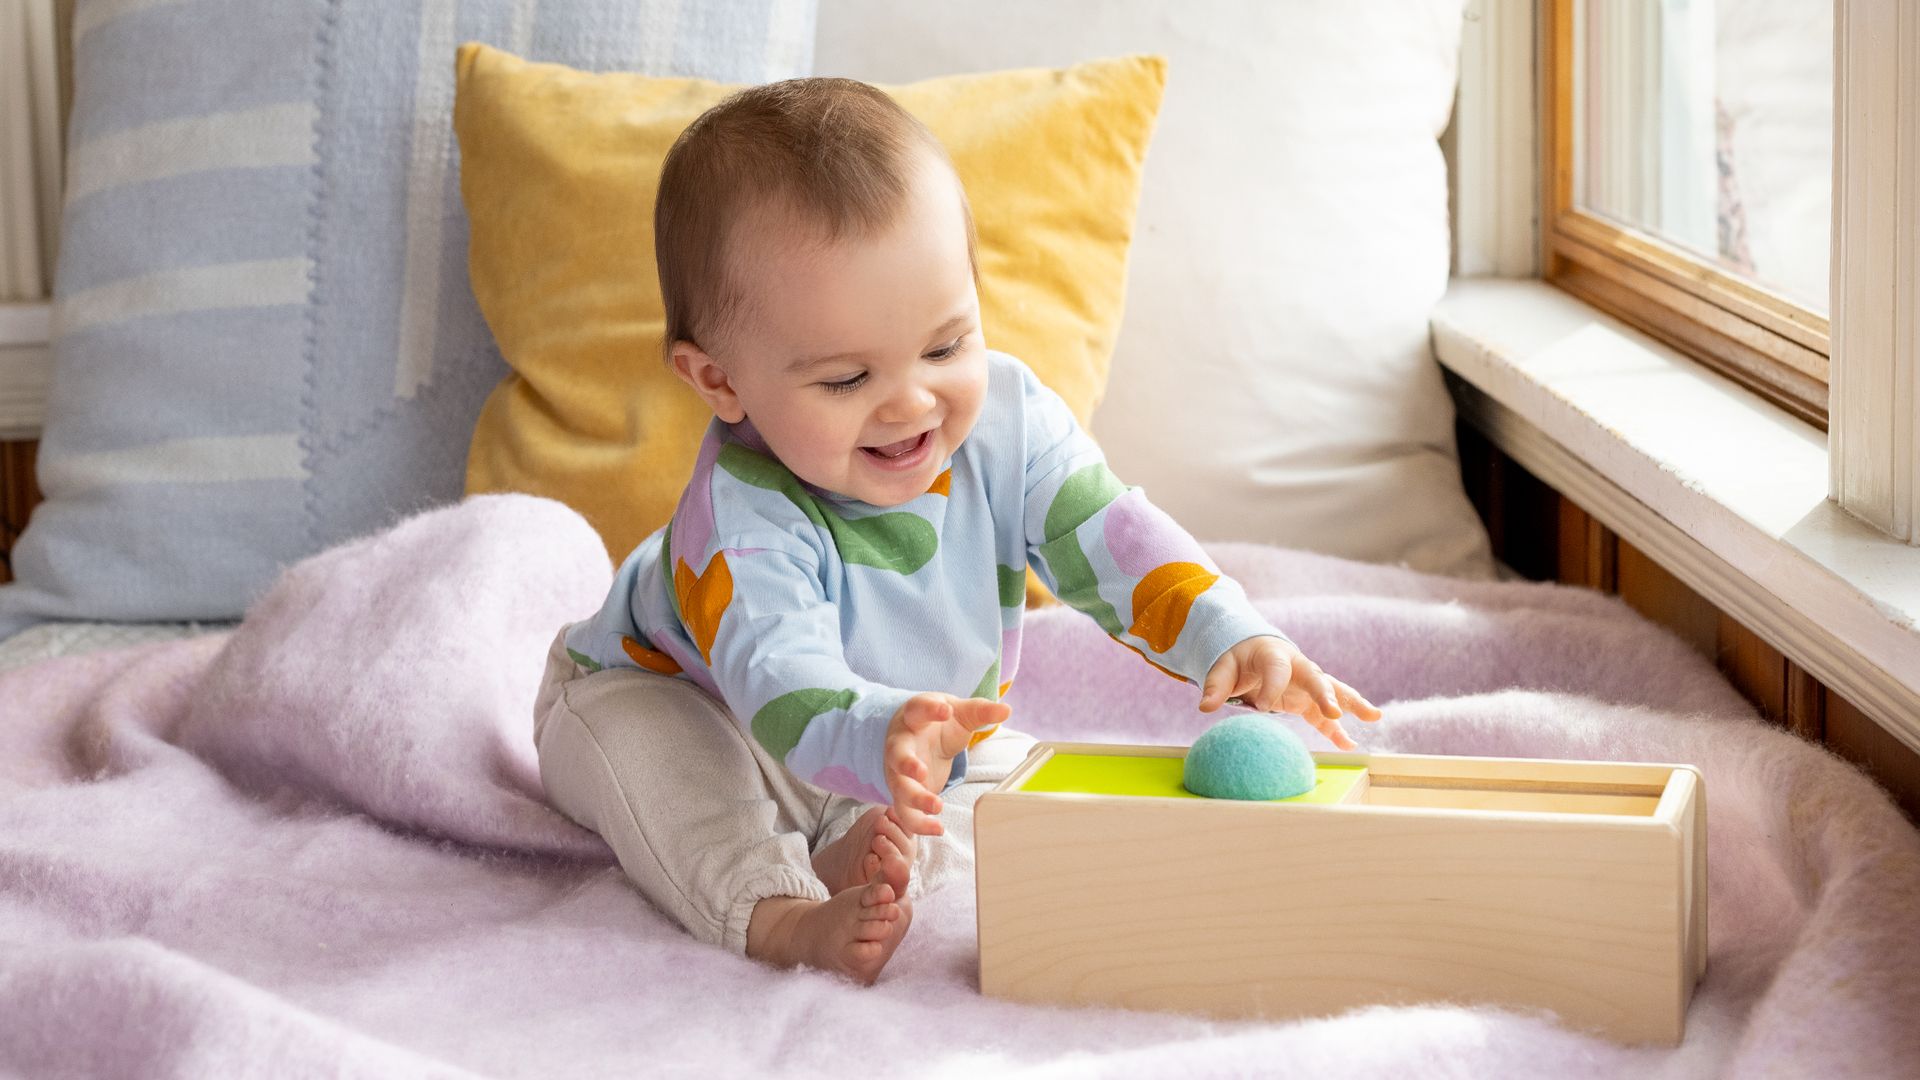 A baby interacts with a child development toy sold by Lovevery.